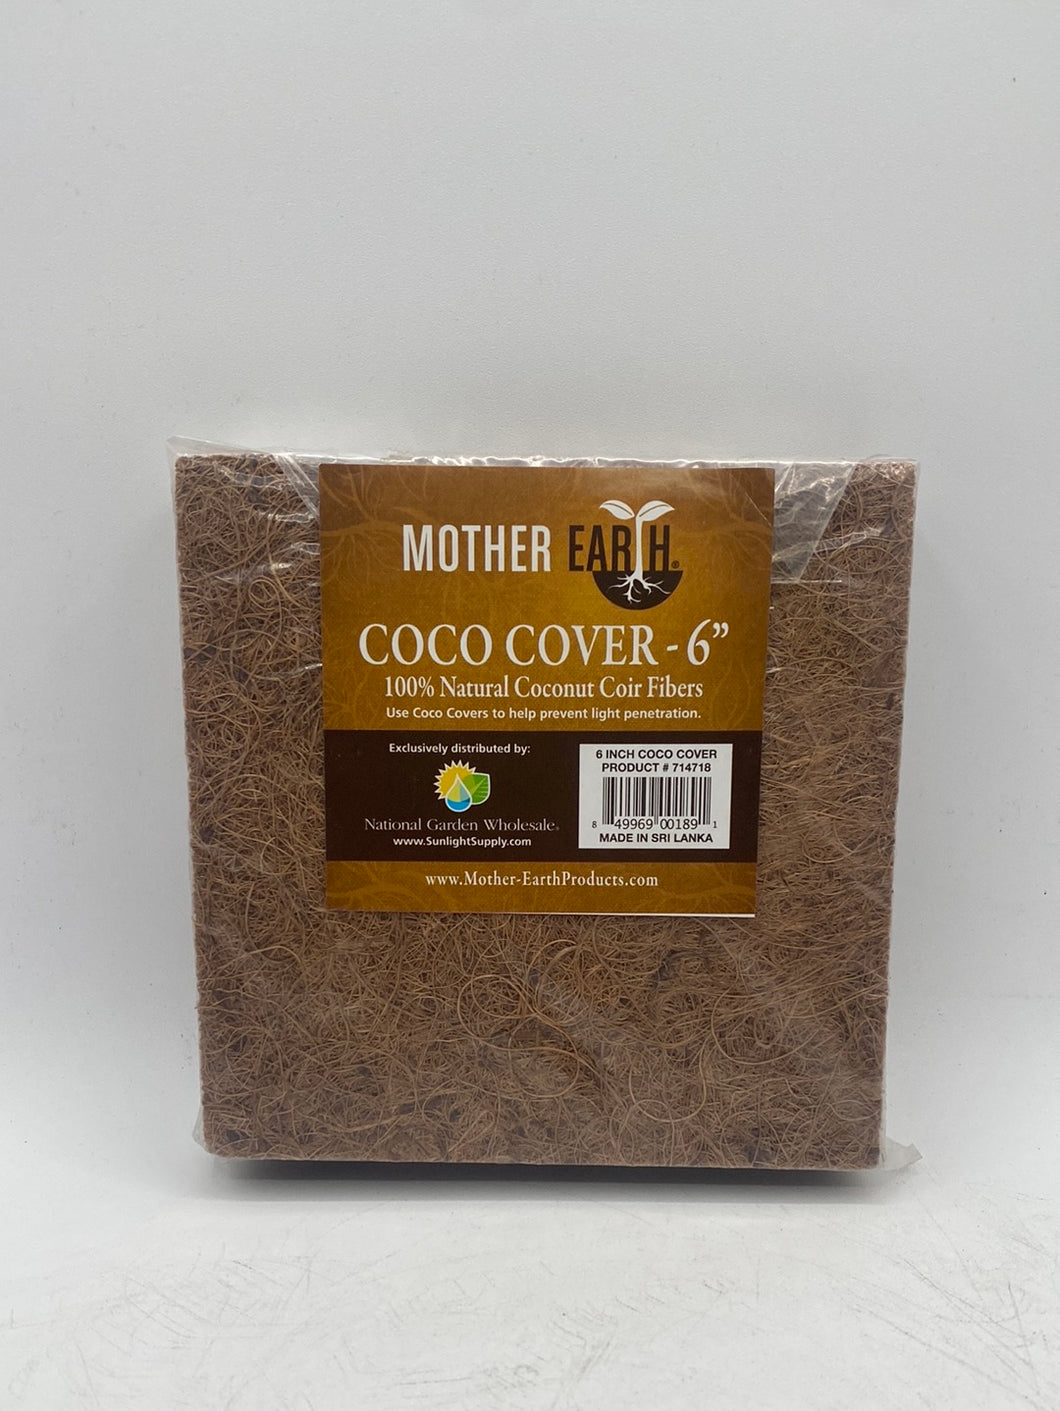 COCO COVER 6” Mother Earth